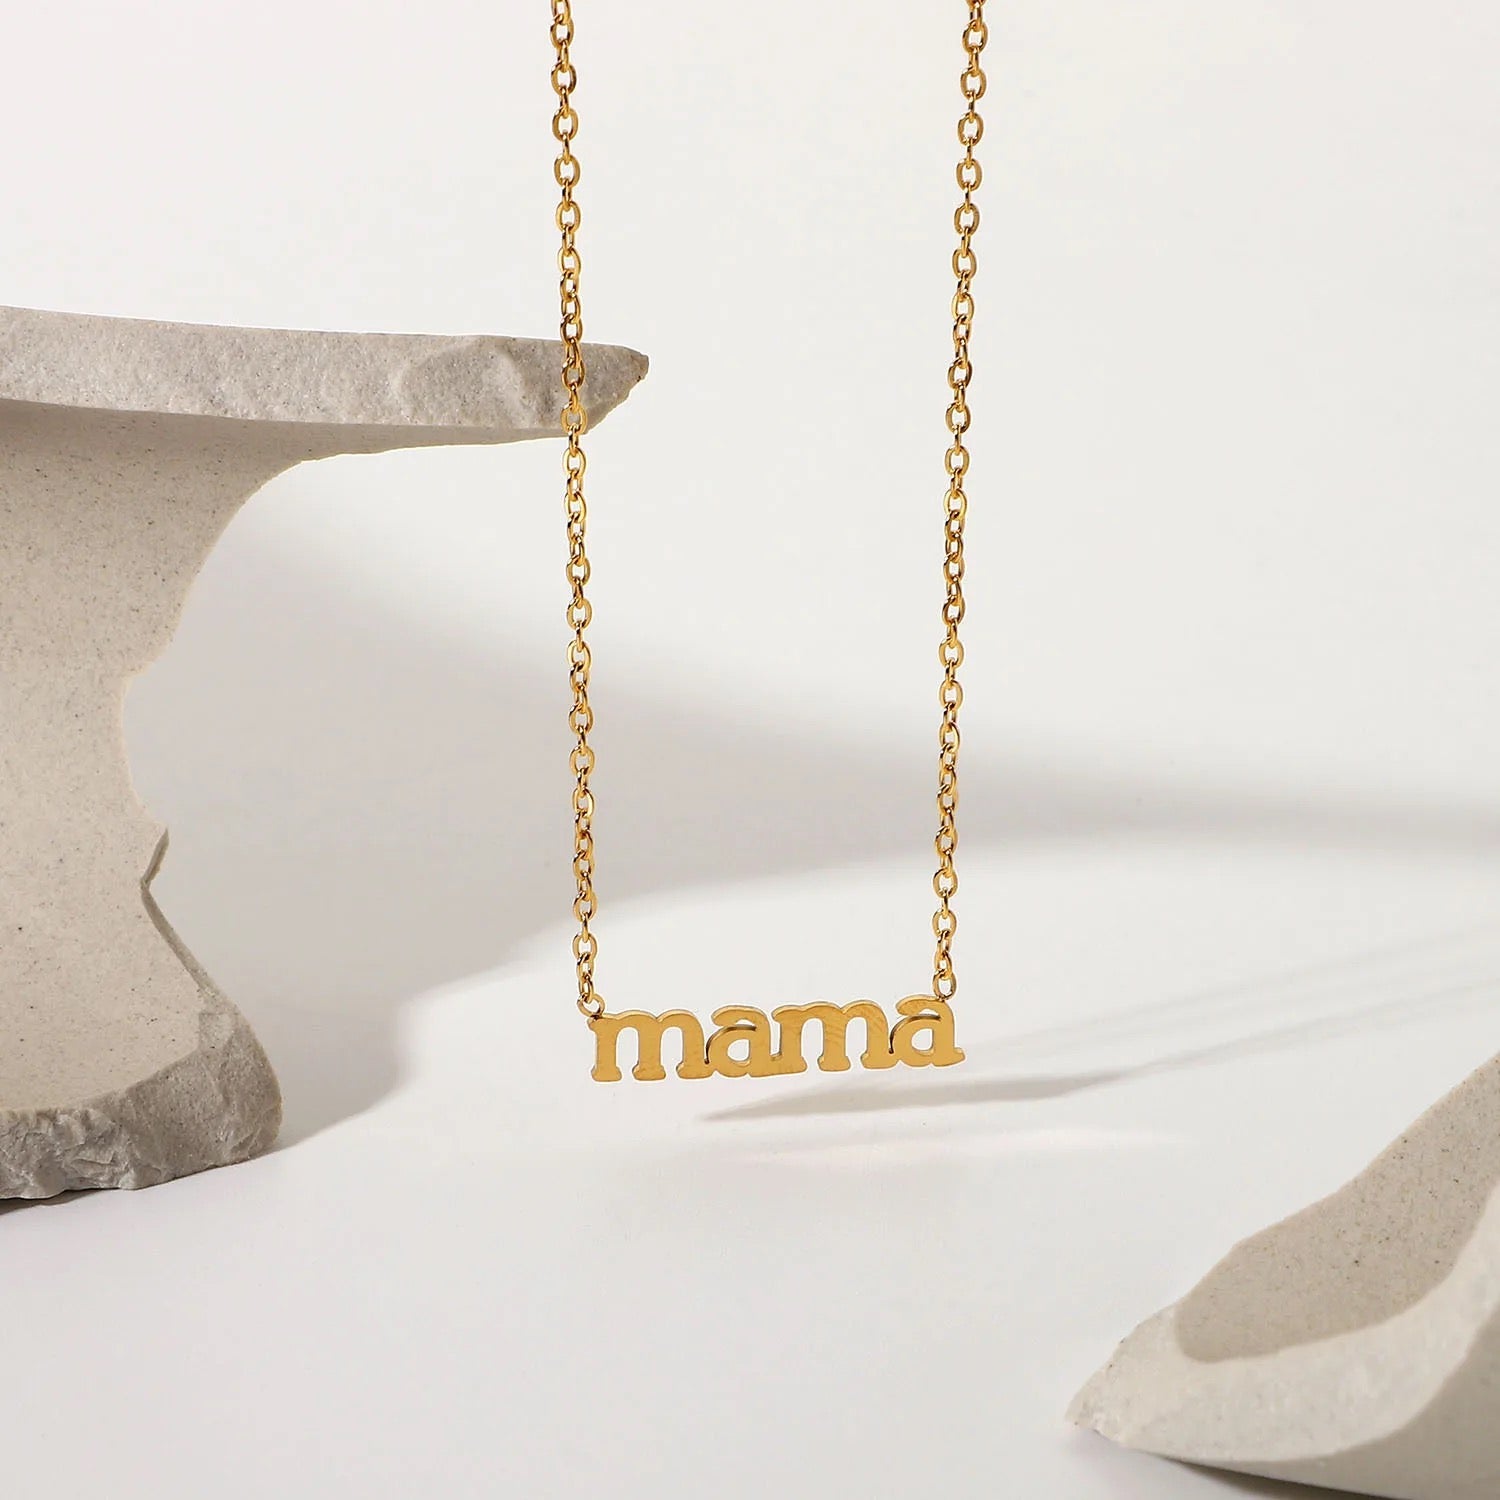 Mama Pendant Necklace-Treat yourself or a loved one to our charming cute alphabet mama necklace. Customize it for a special touch. Purchase now for a meaningful and heartfelt gift.-Dazzledvenus